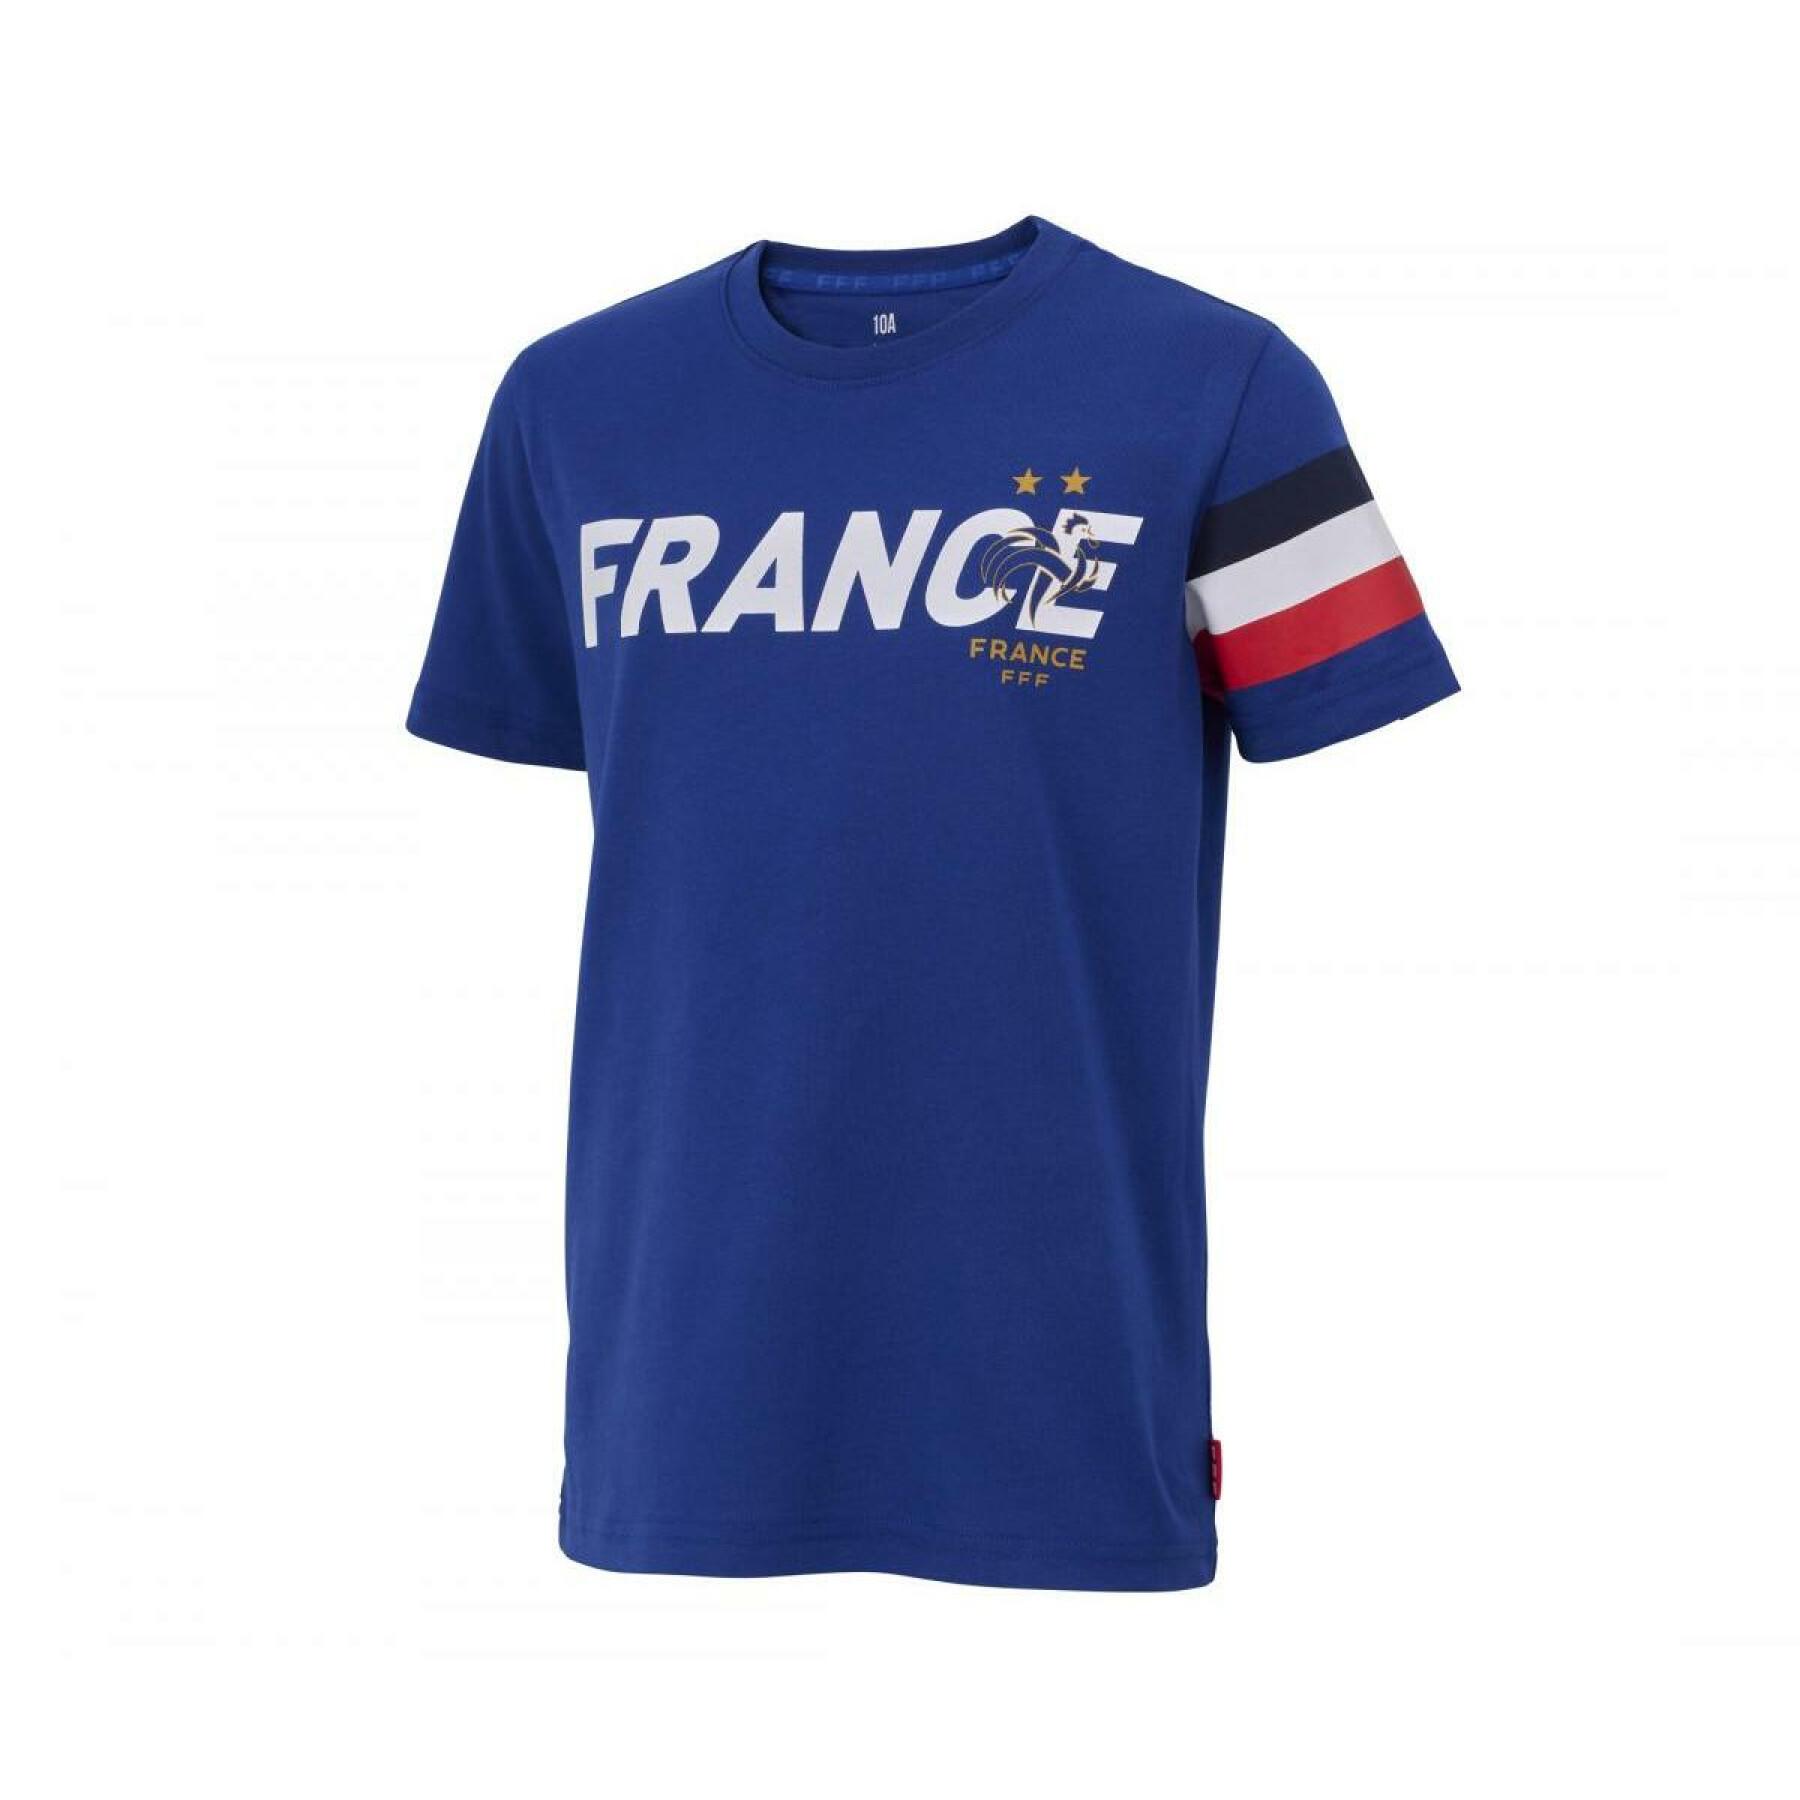 Child's T-shirt France Graphic 2022/23